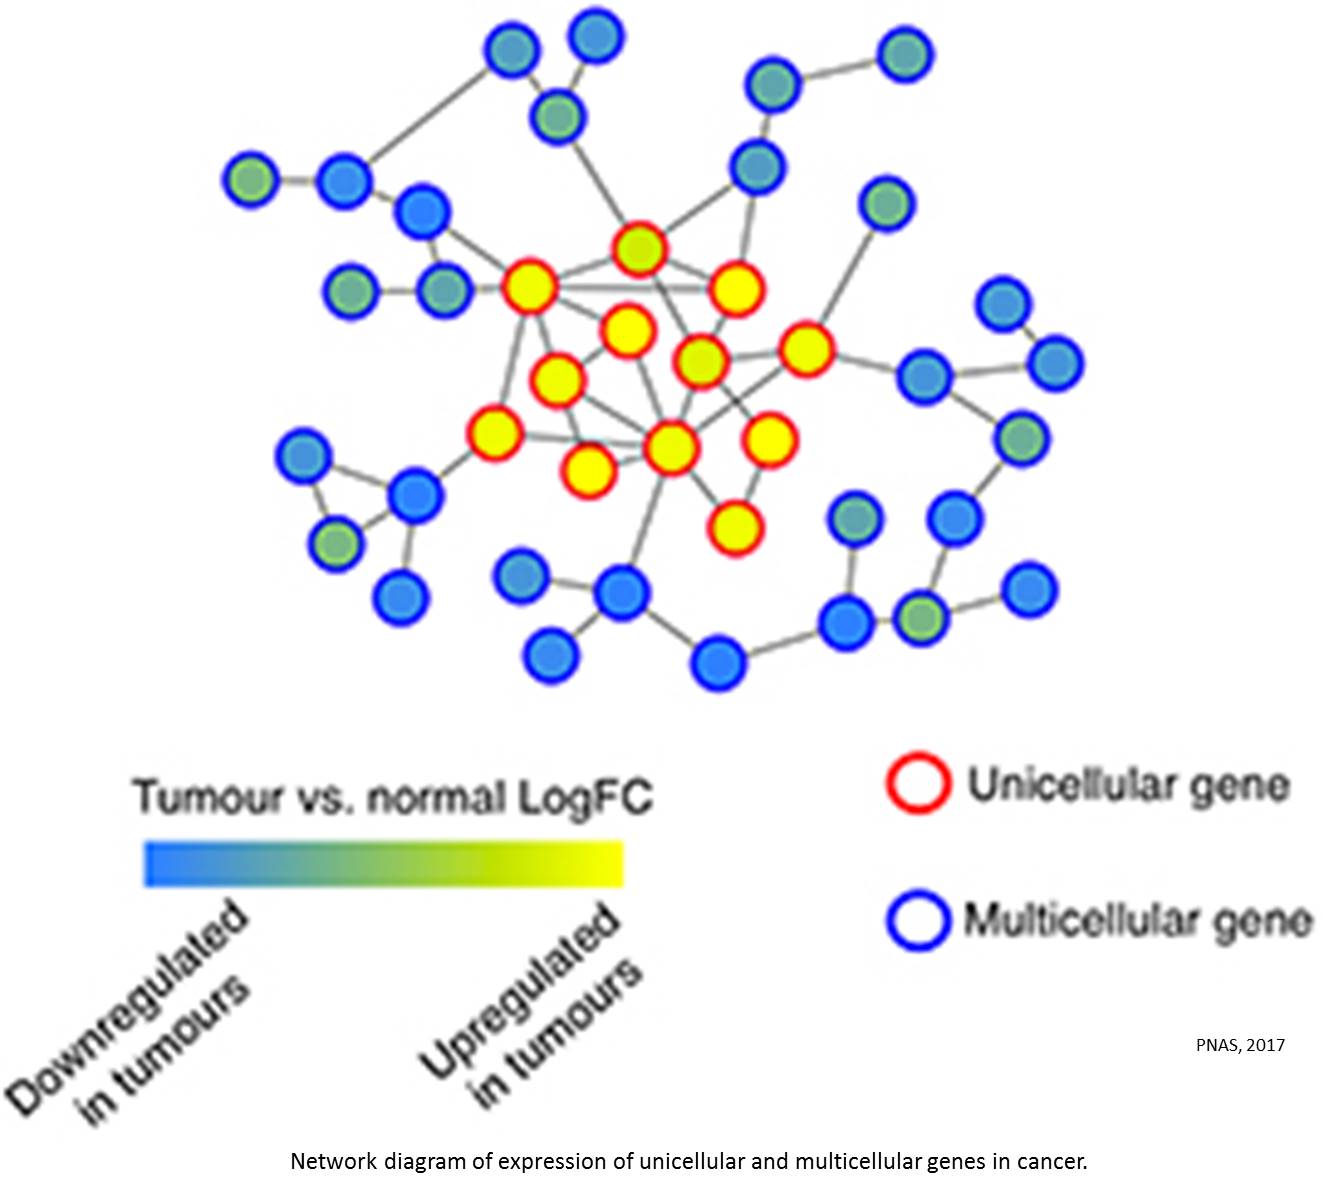 Cancer and partitioning of gene function